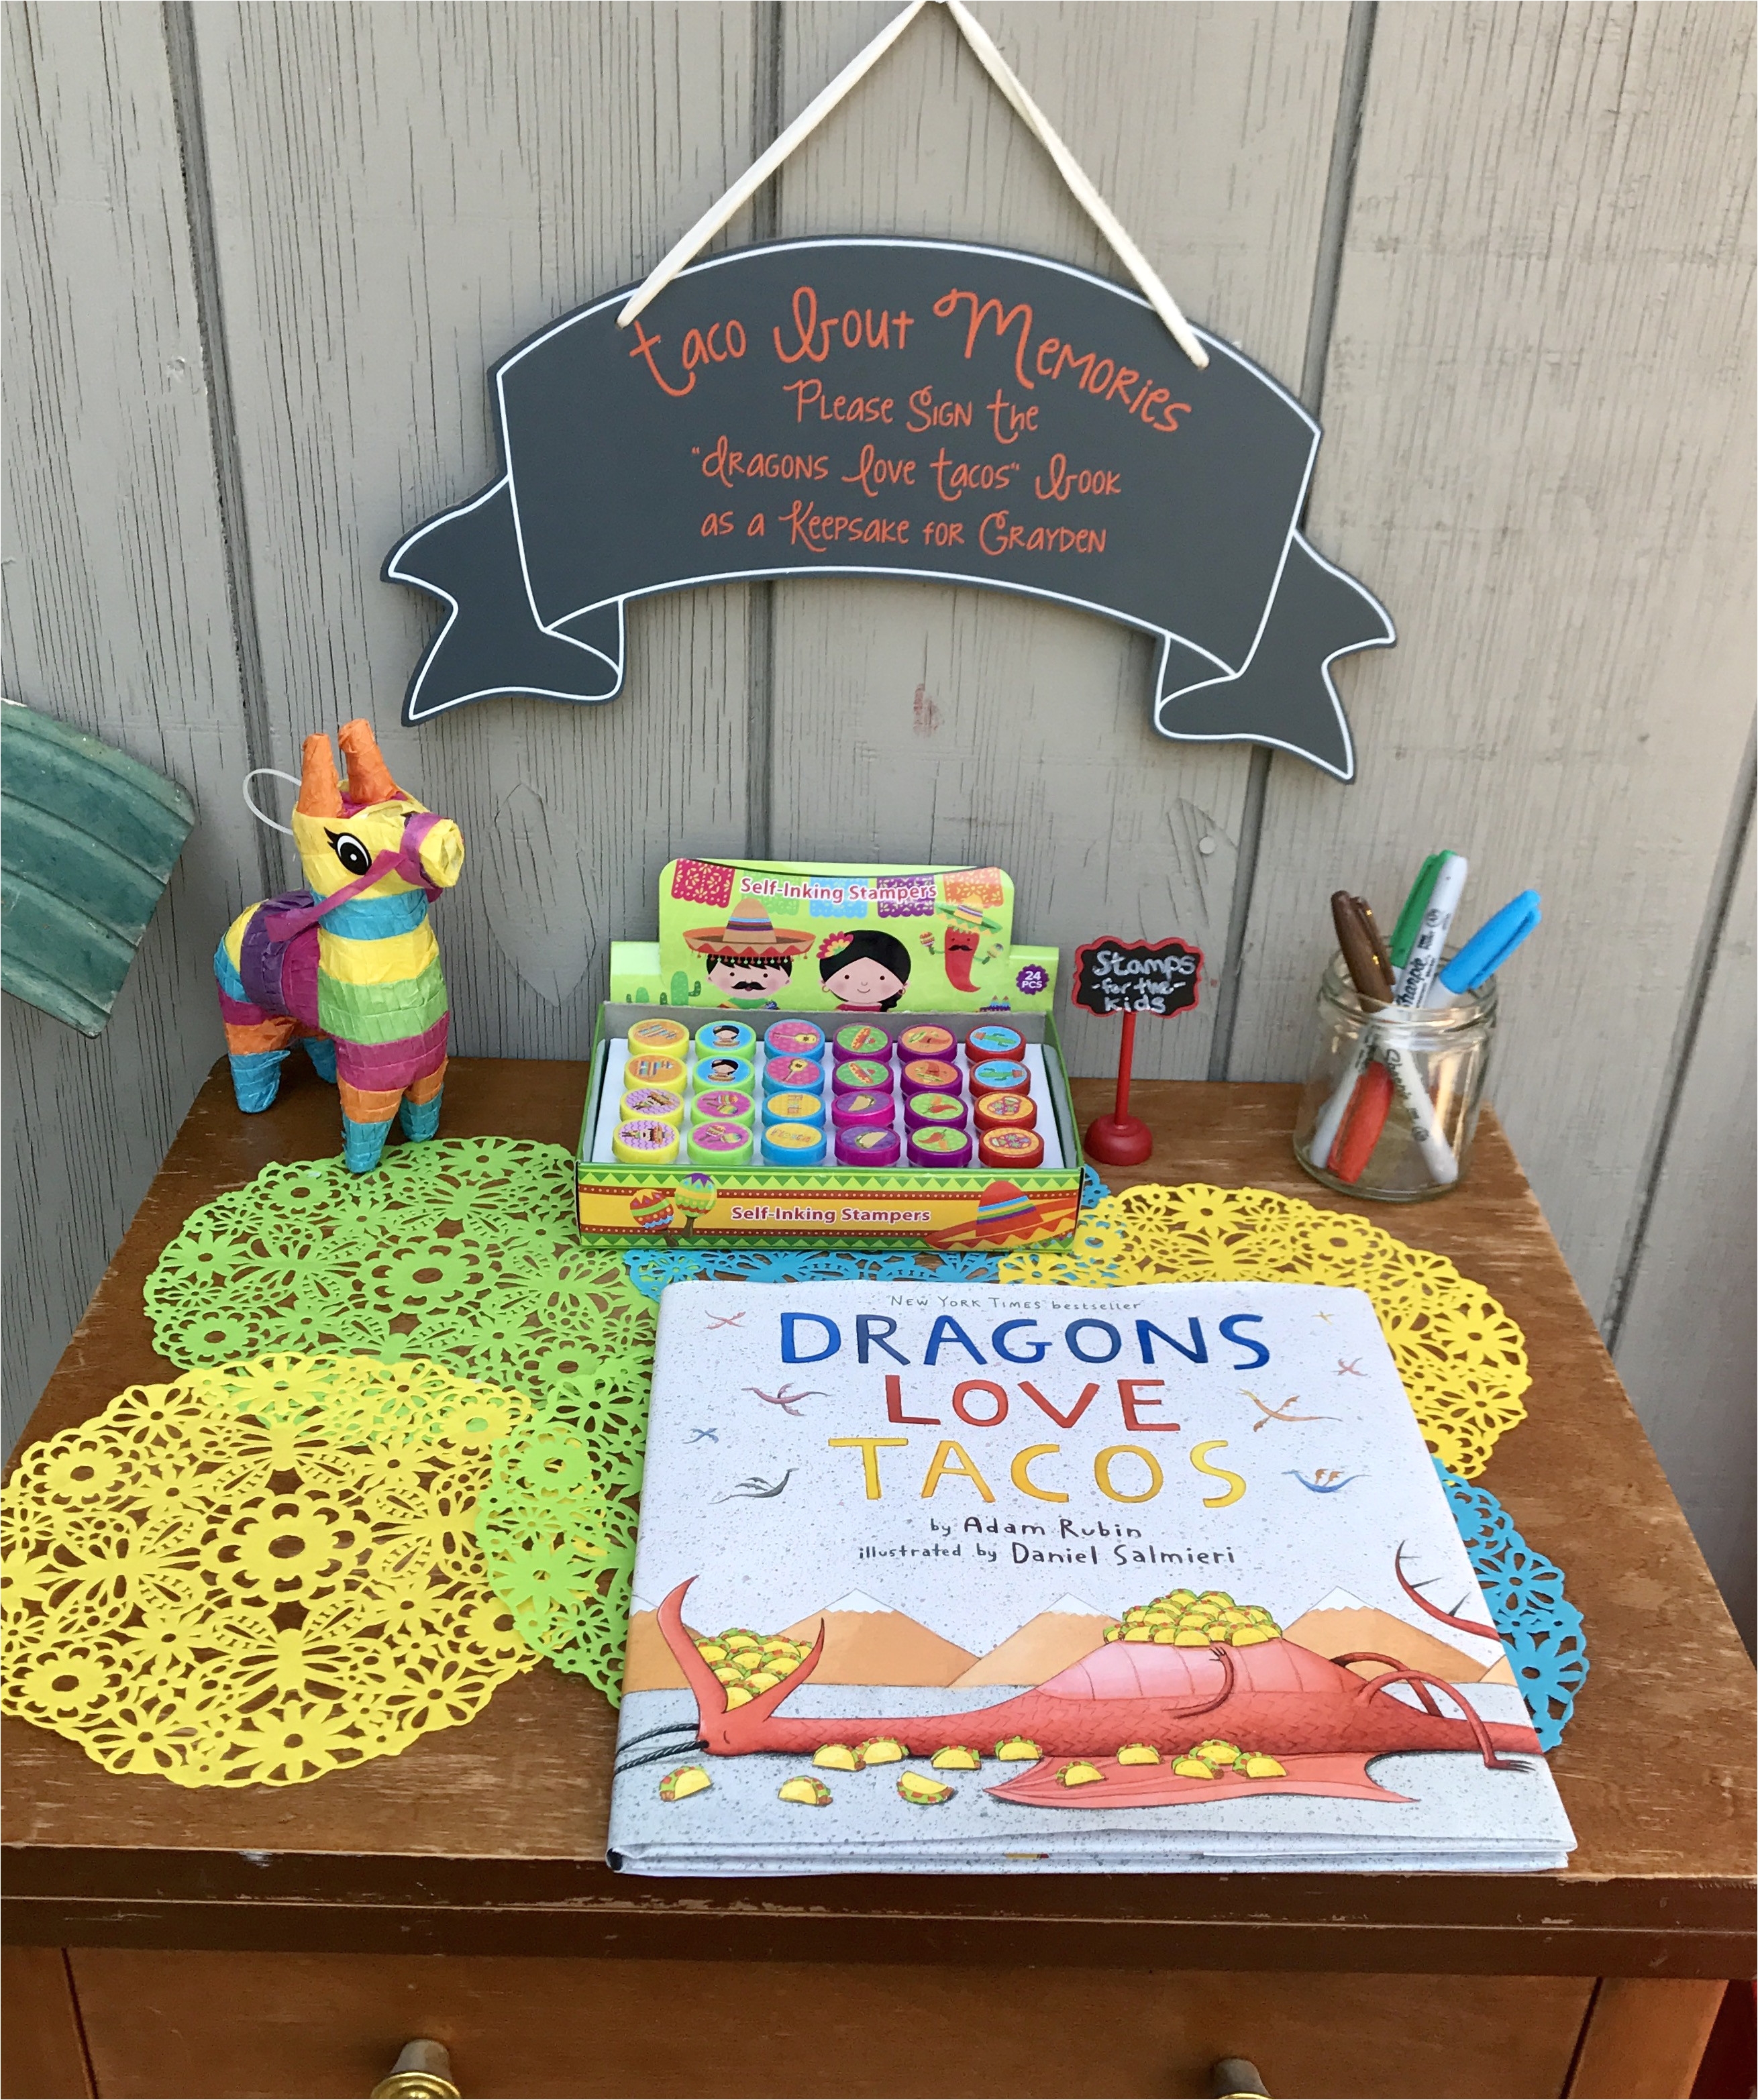 birthday idea elegant taco bout memories quot first birthday taco party decor with